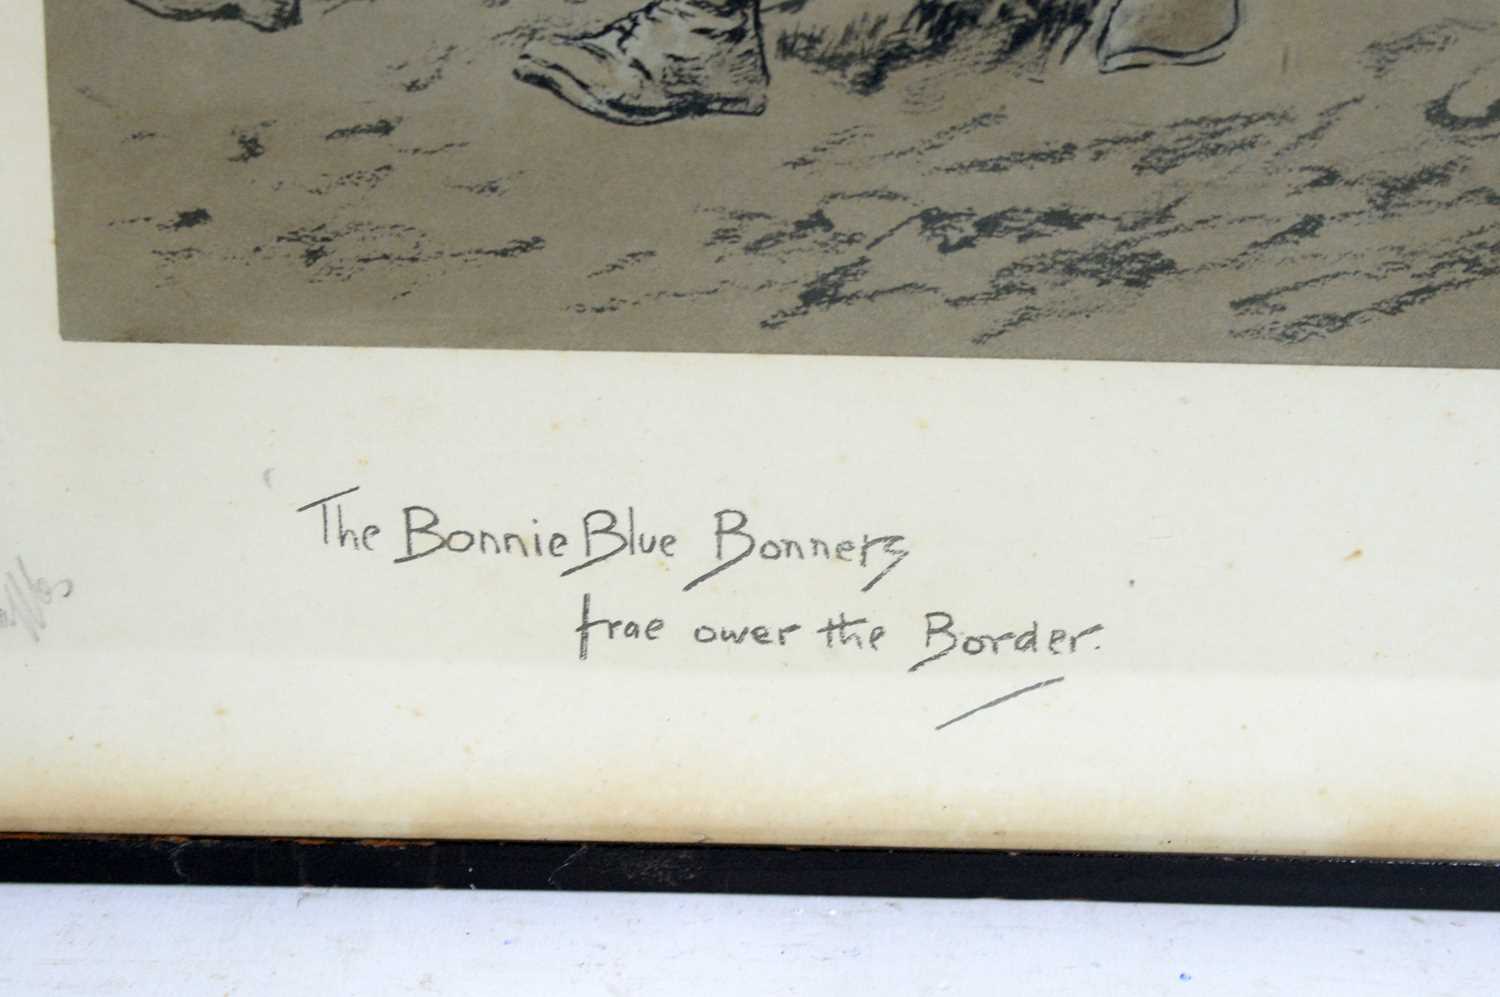 "Snaffles" Charles Johnson Payne - The Bonnie Blue Bonnets frae ower the Border | lithograph - Image 2 of 5